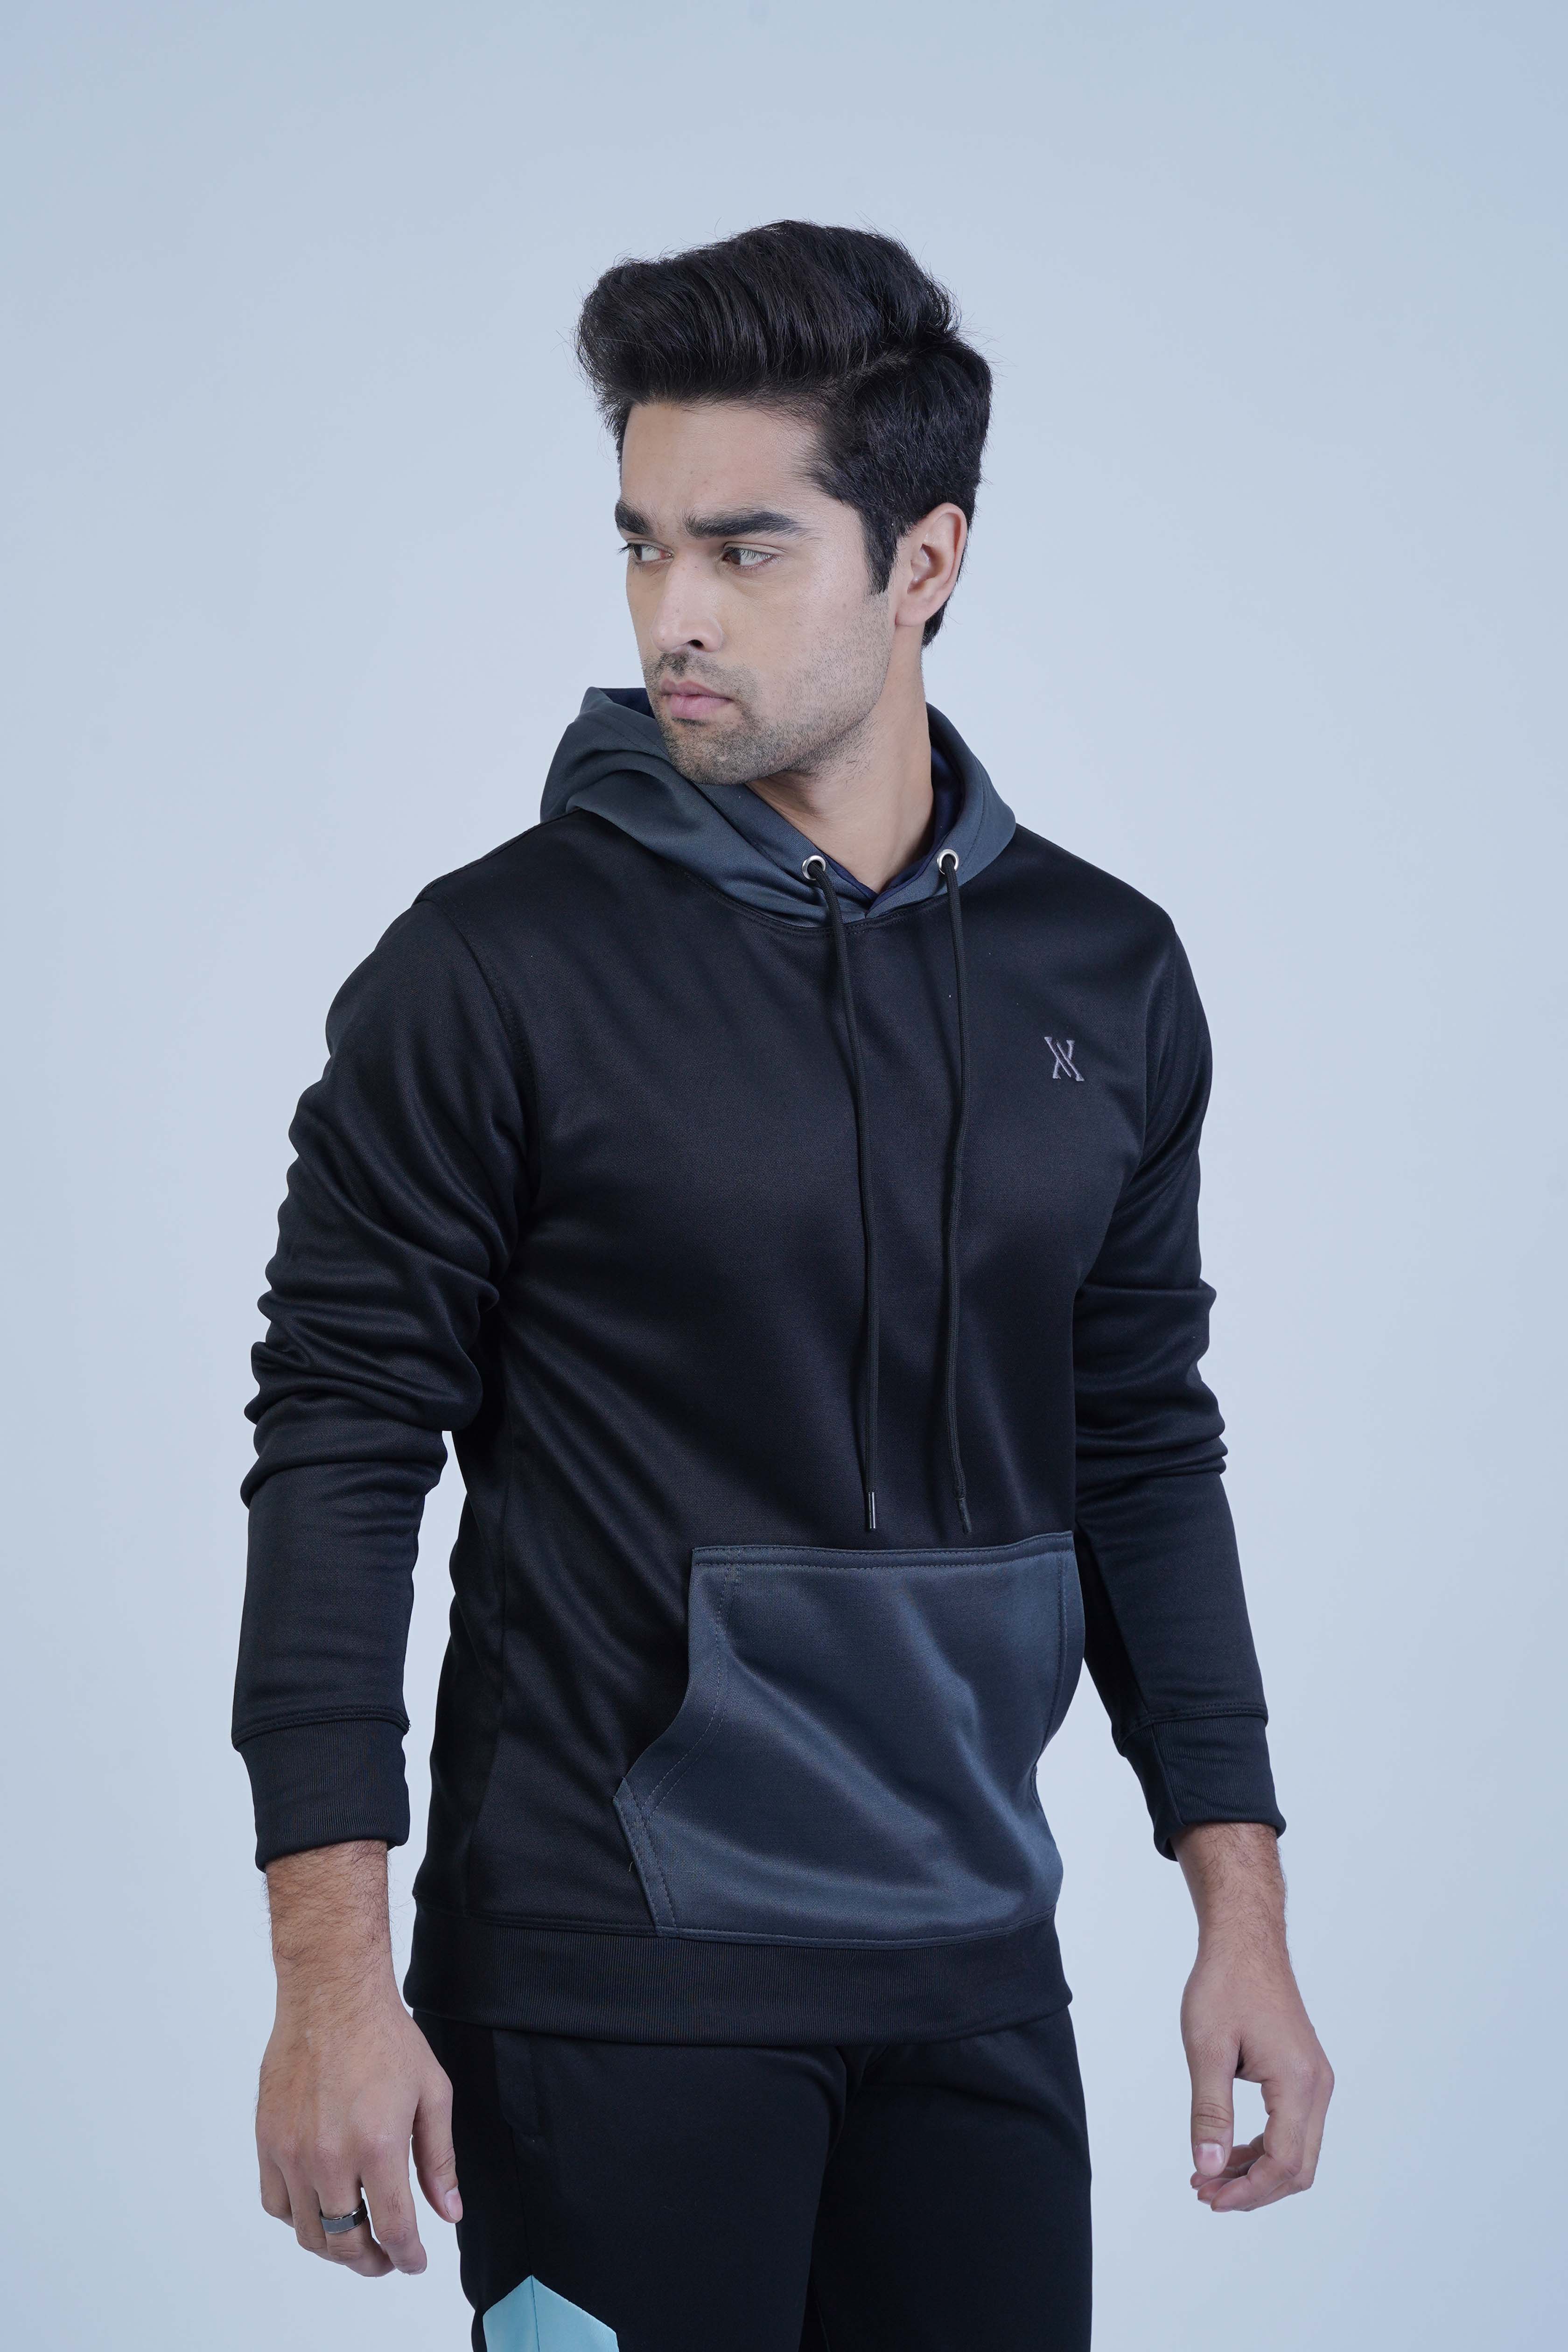 Relaxed Fit Black Hoodie - The Xea Men's Clothing